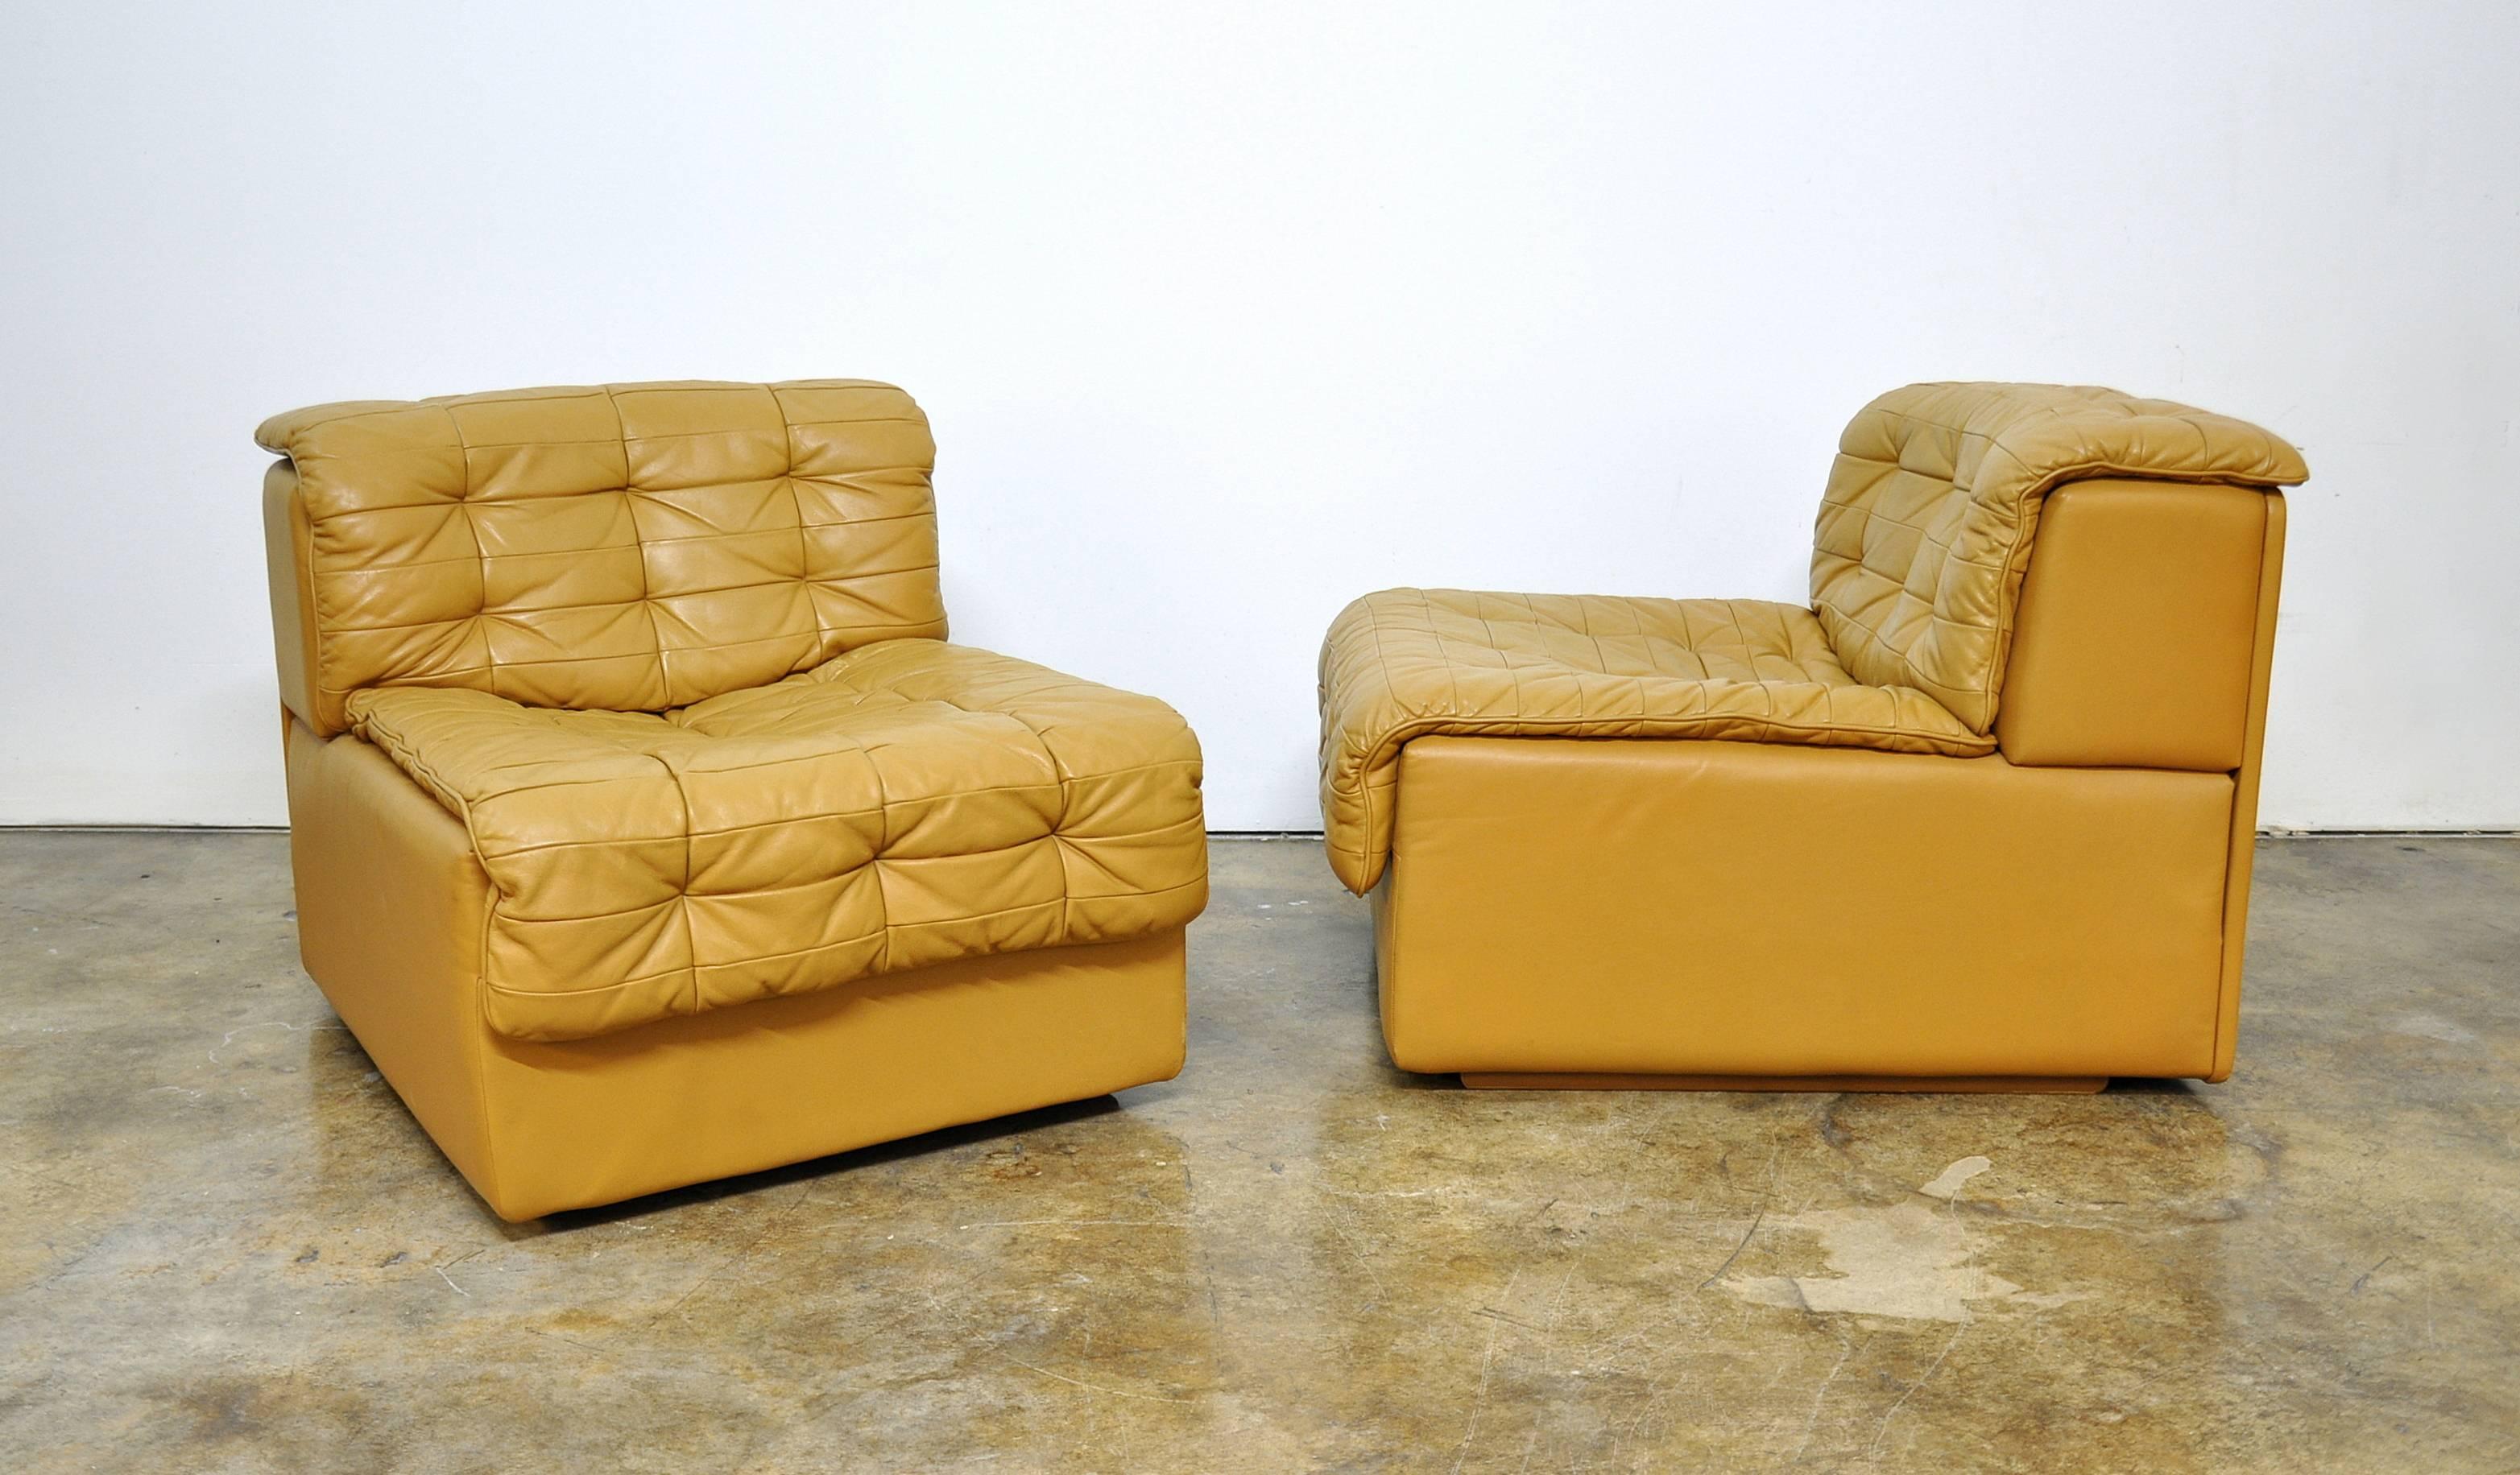 Pair of Italian Modern style soft caramel patchwork Chesterfield leather slipper or occasional chairs manufactured by De Sede of Switzerland in the 1970s and imported by Turner, New York. The chairs feature a modular design and can be used together